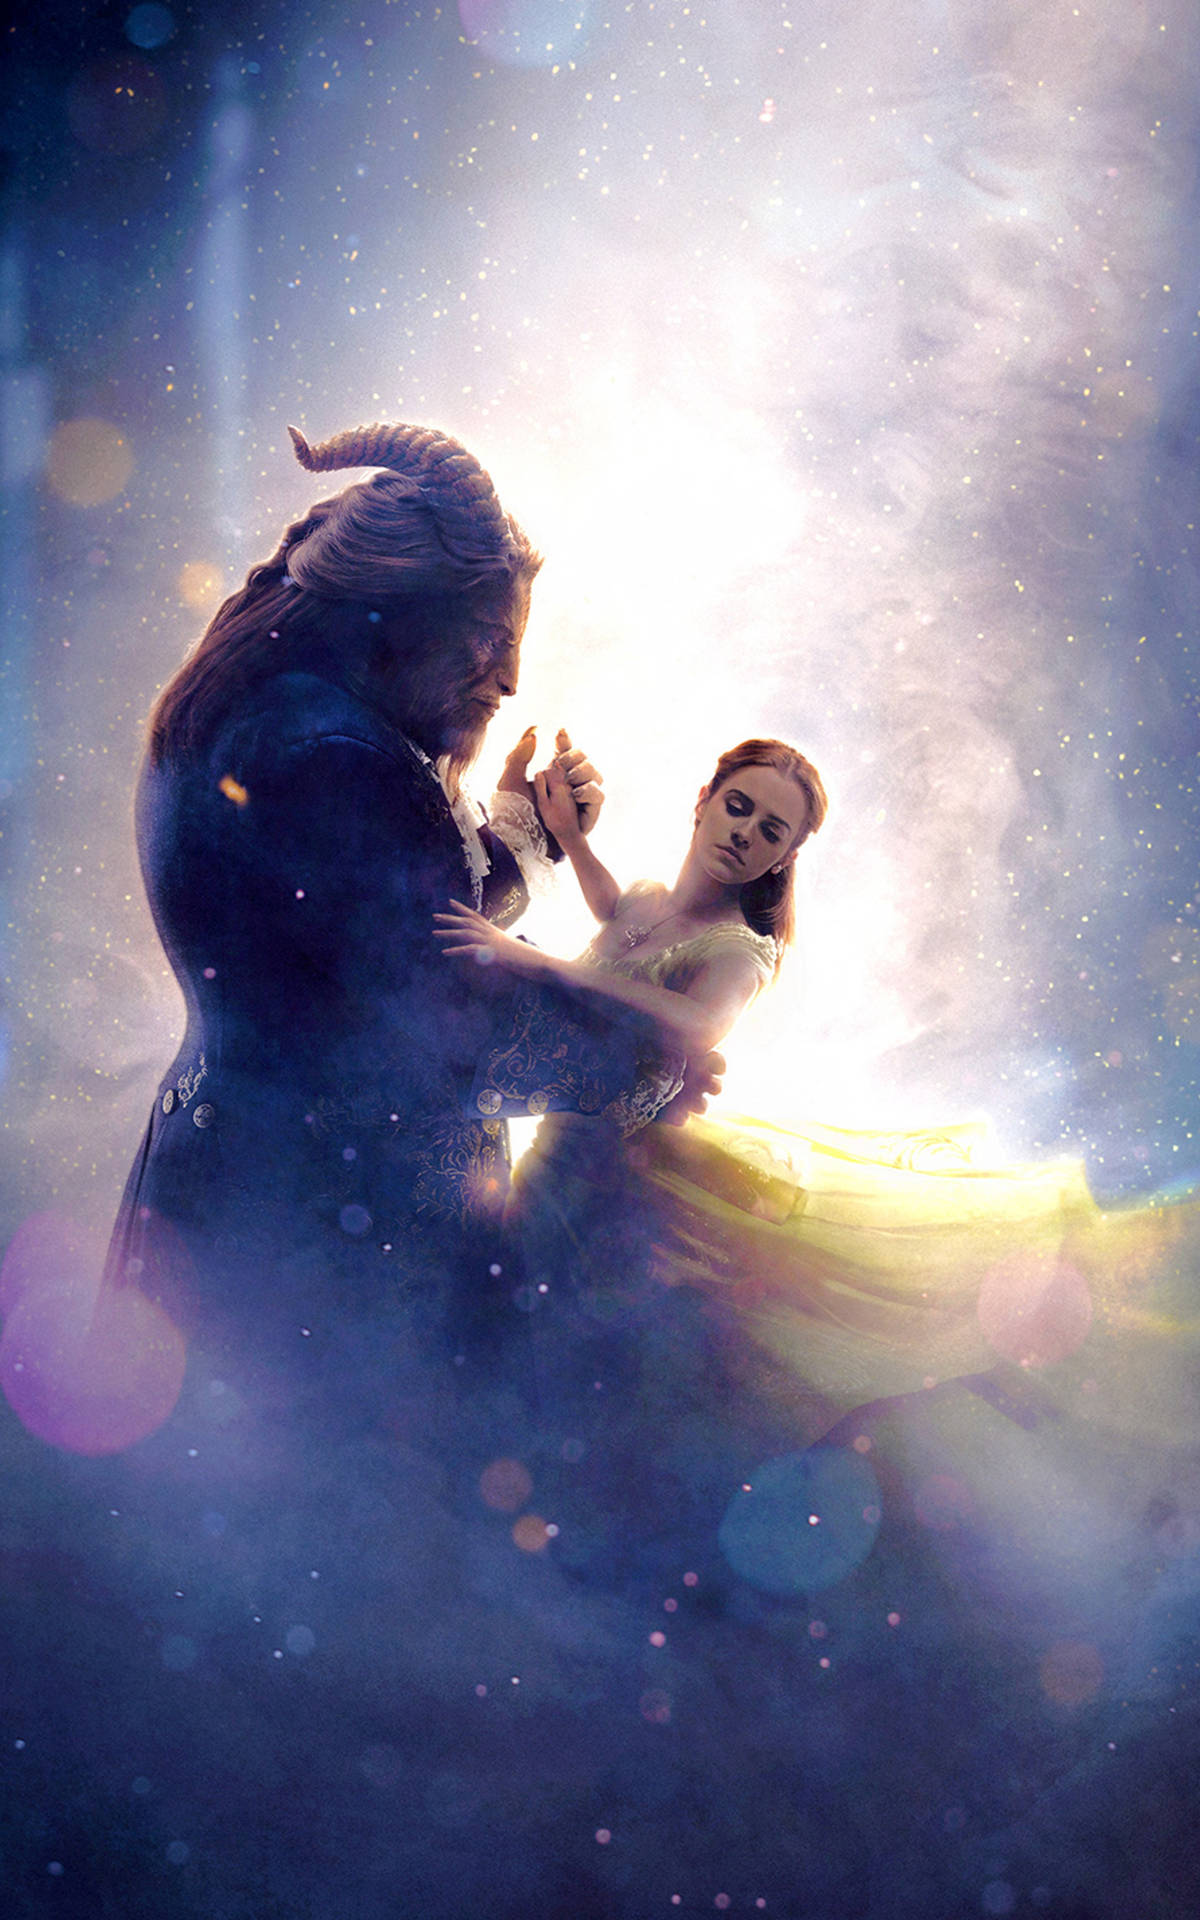 Mobile Beauty And The Beast Wallpaper